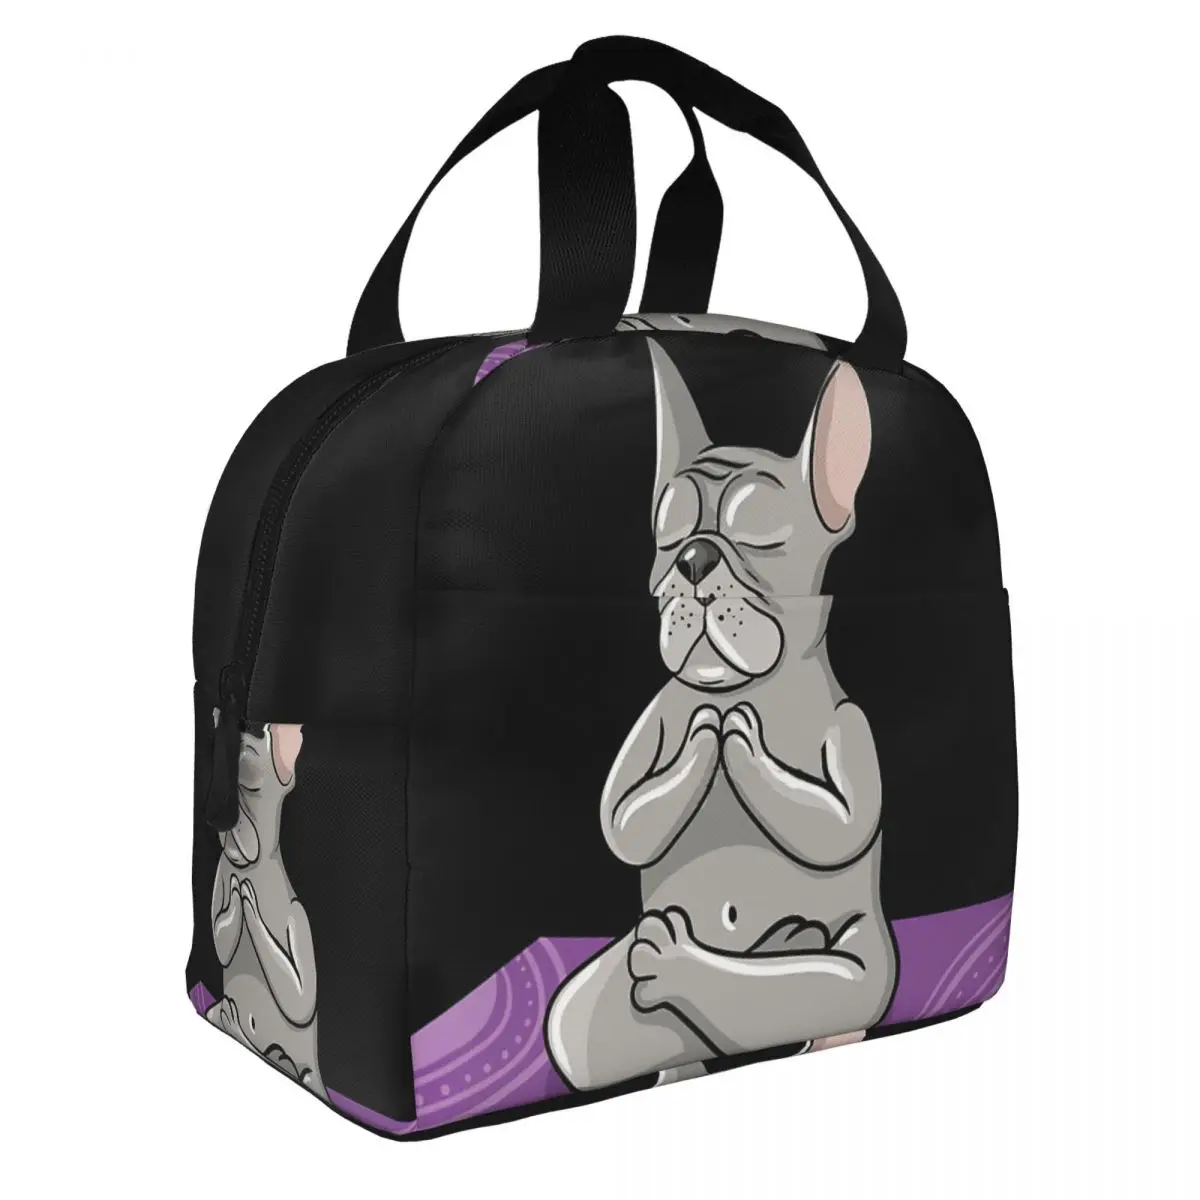 Yoga French Bulldog Lunch Bento Bags Portable Aluminum Foil thickened Thermal Cloth Lunch Bag for Women Men Boy